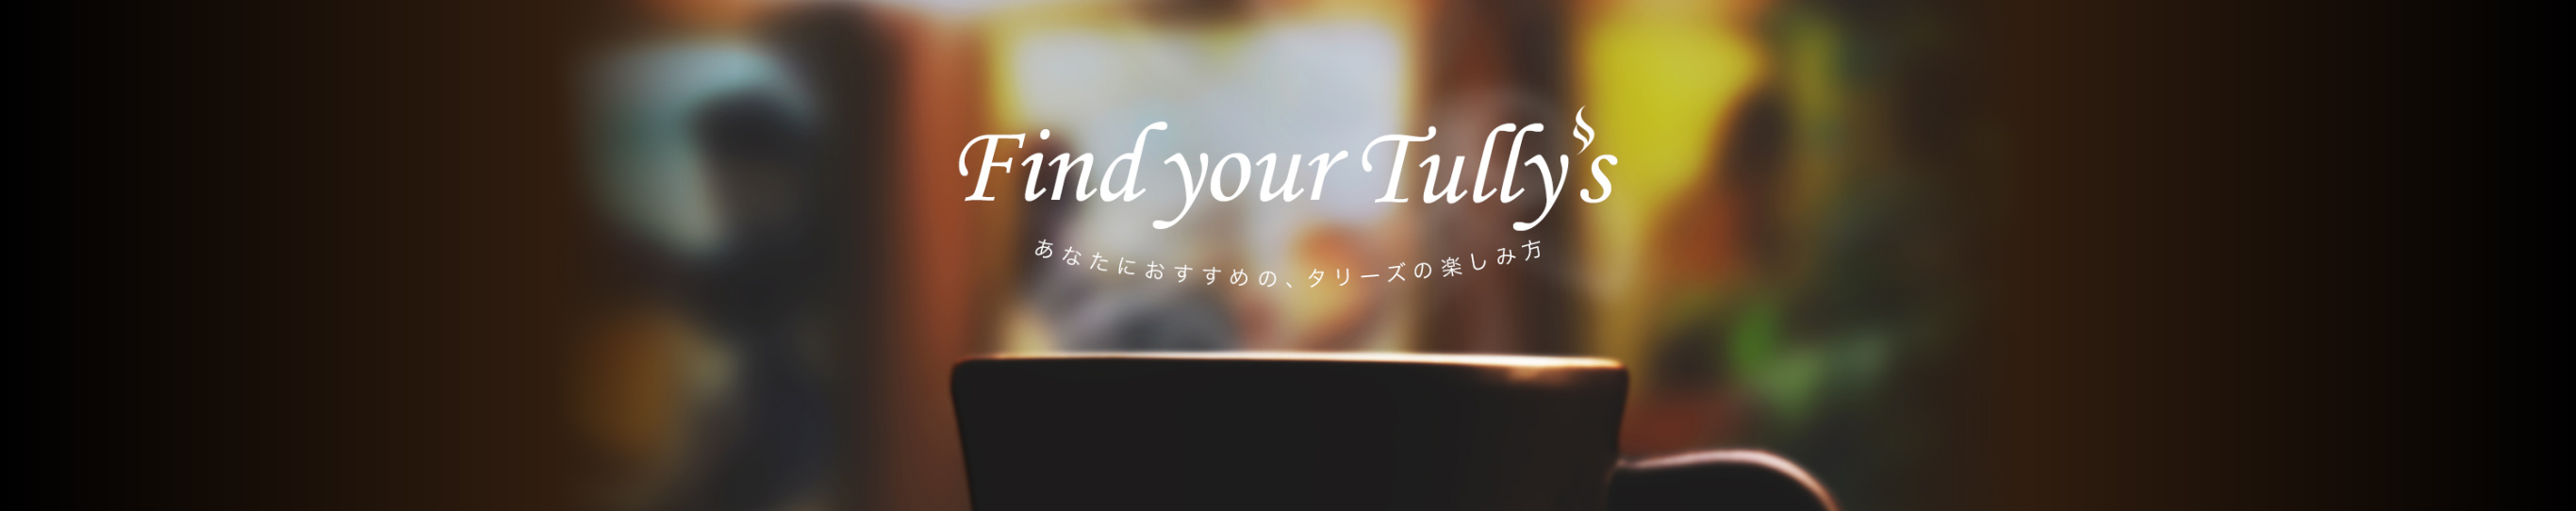 Taste The Difference Tully S Coffee タリーズコーヒー